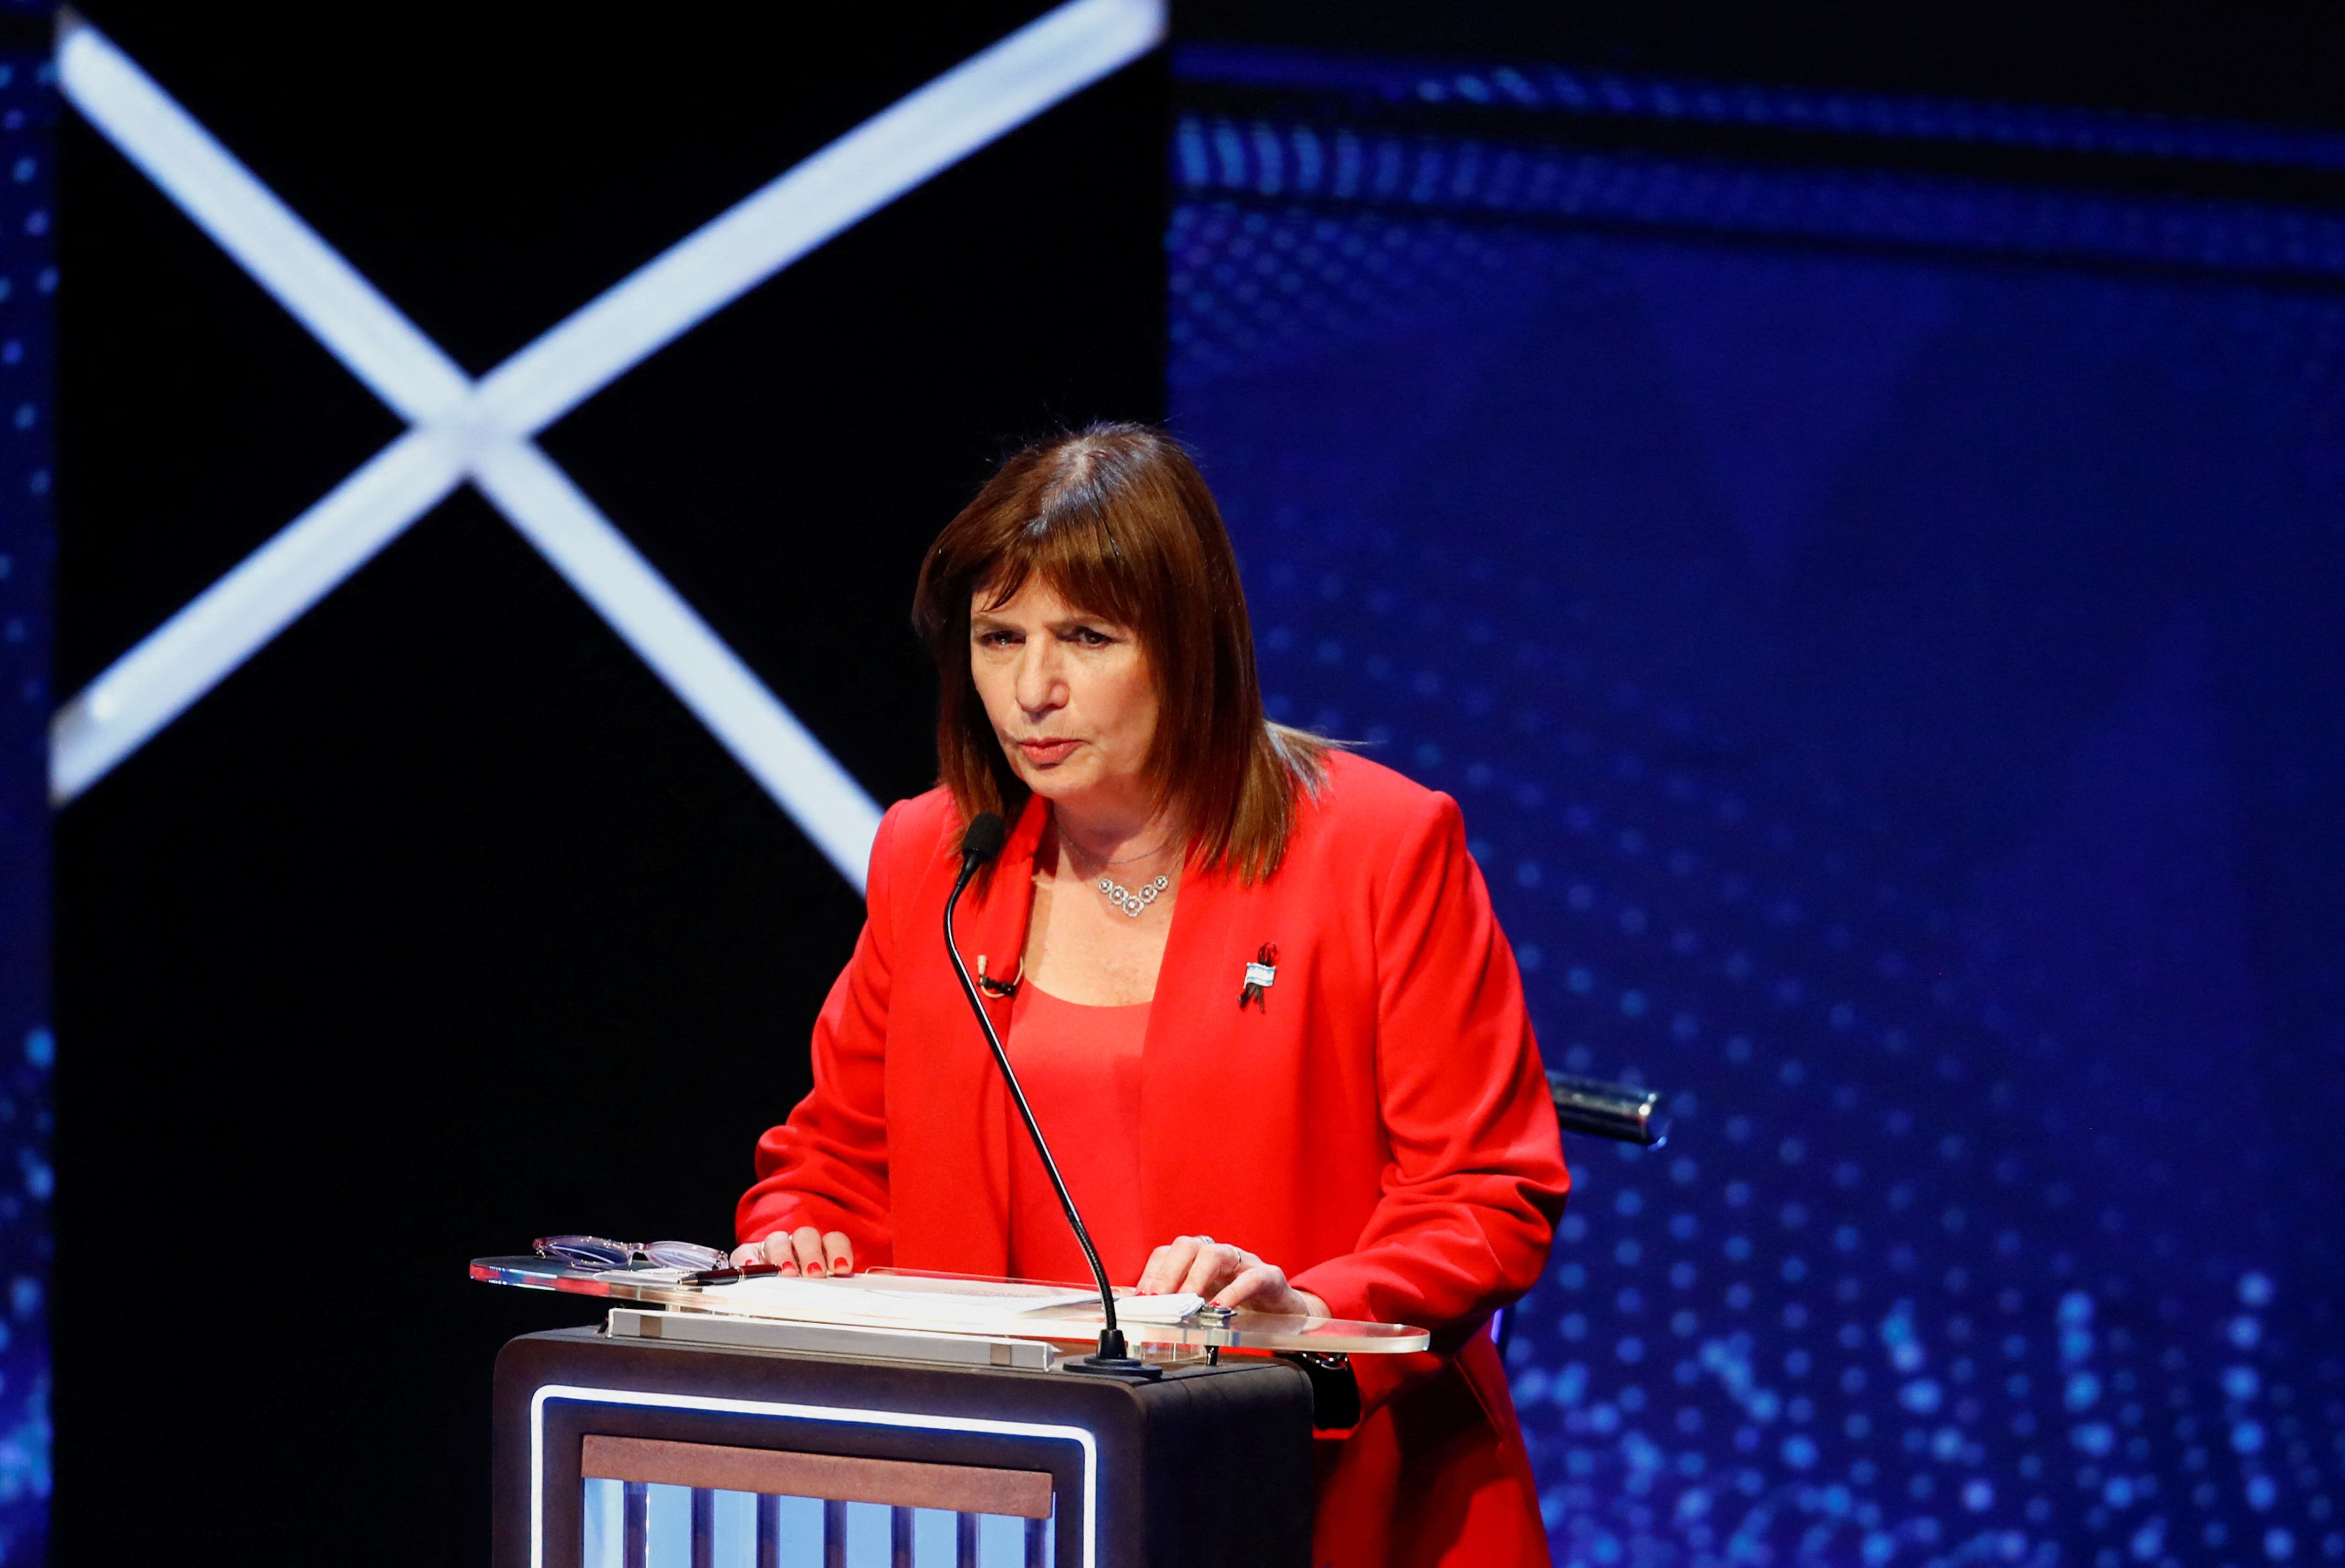 Patricia Bullrich, candidate for president of the Nation